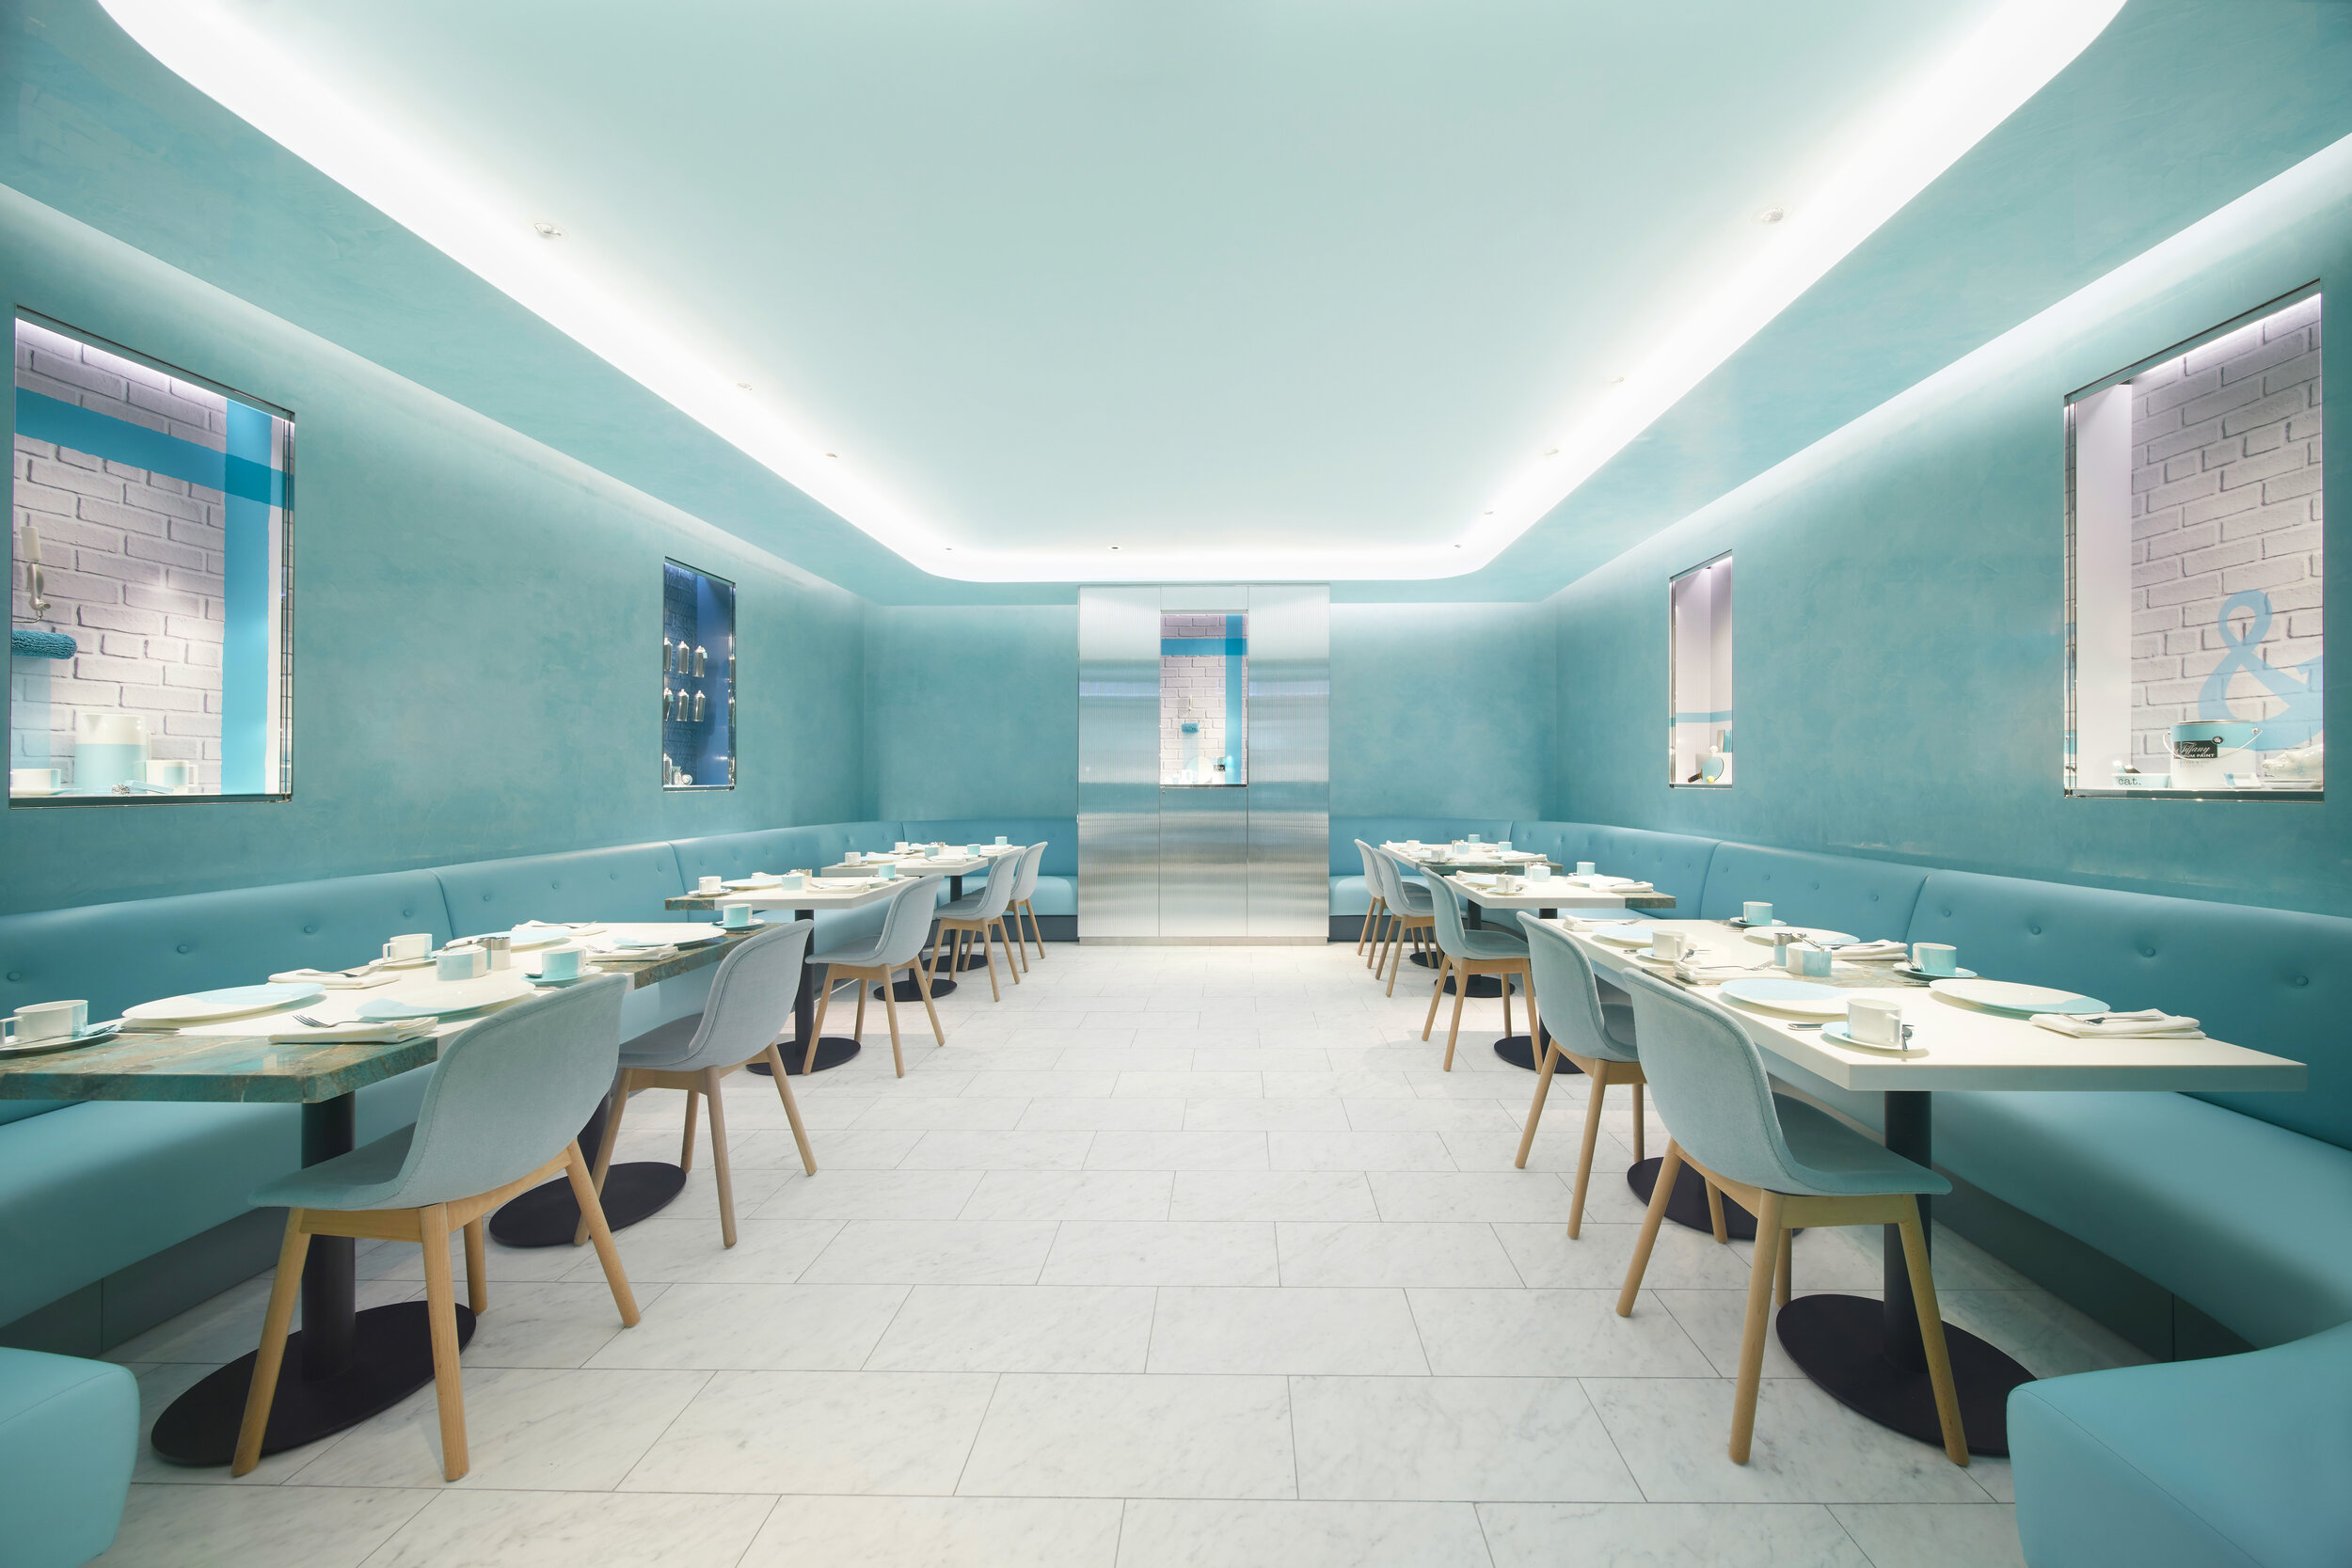 Book Your Blue Box Café by Daniel Boulud Reservation Now on Resy